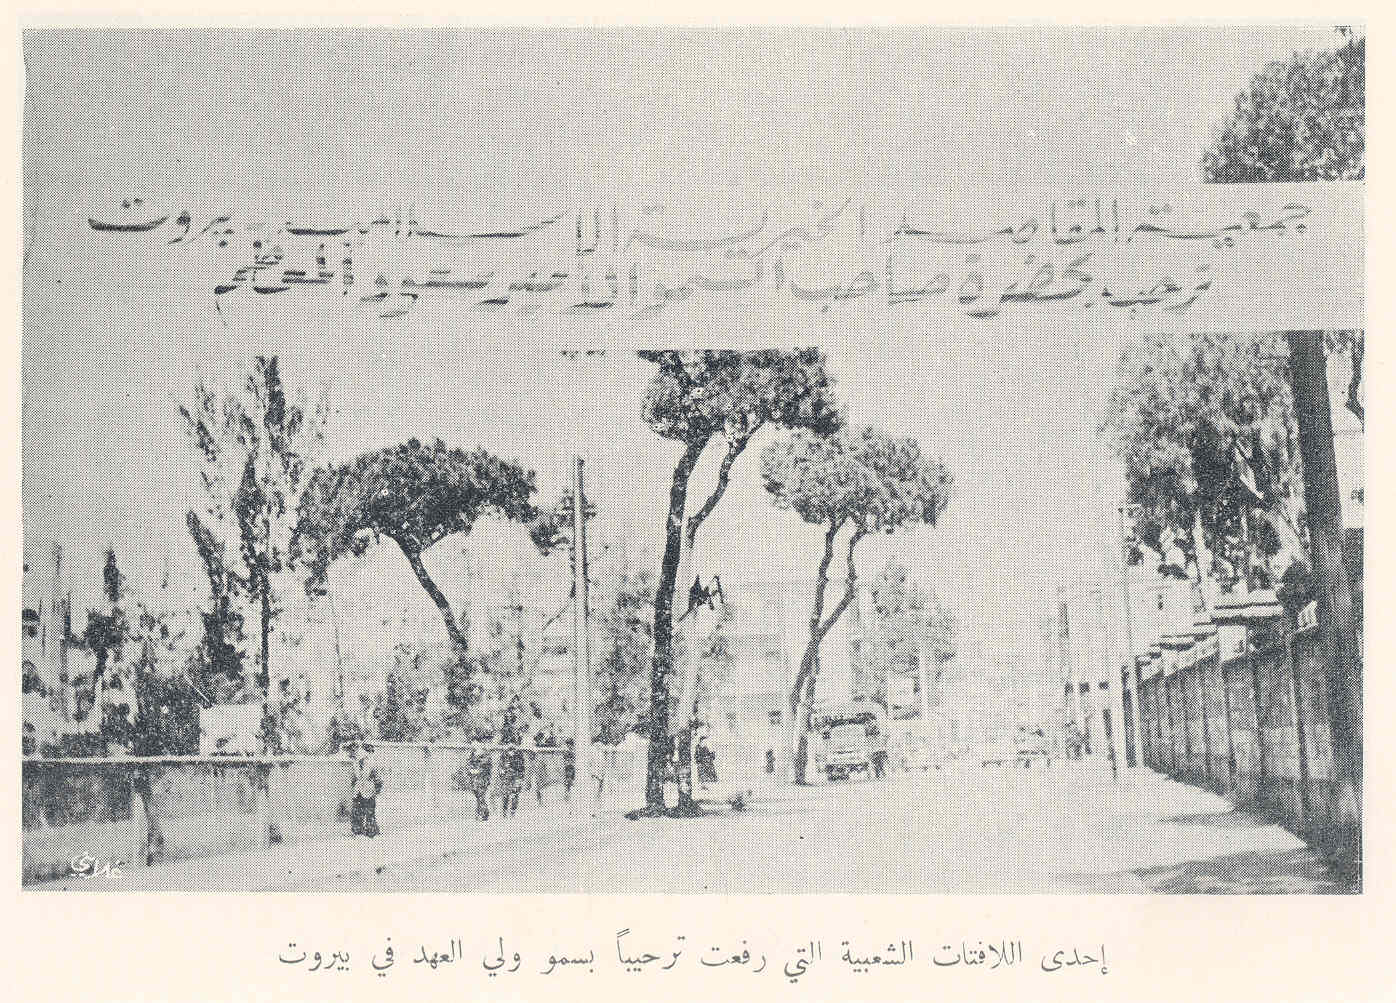 One sign that the People filed welcome Crown Prince Saud Beirut in 1953